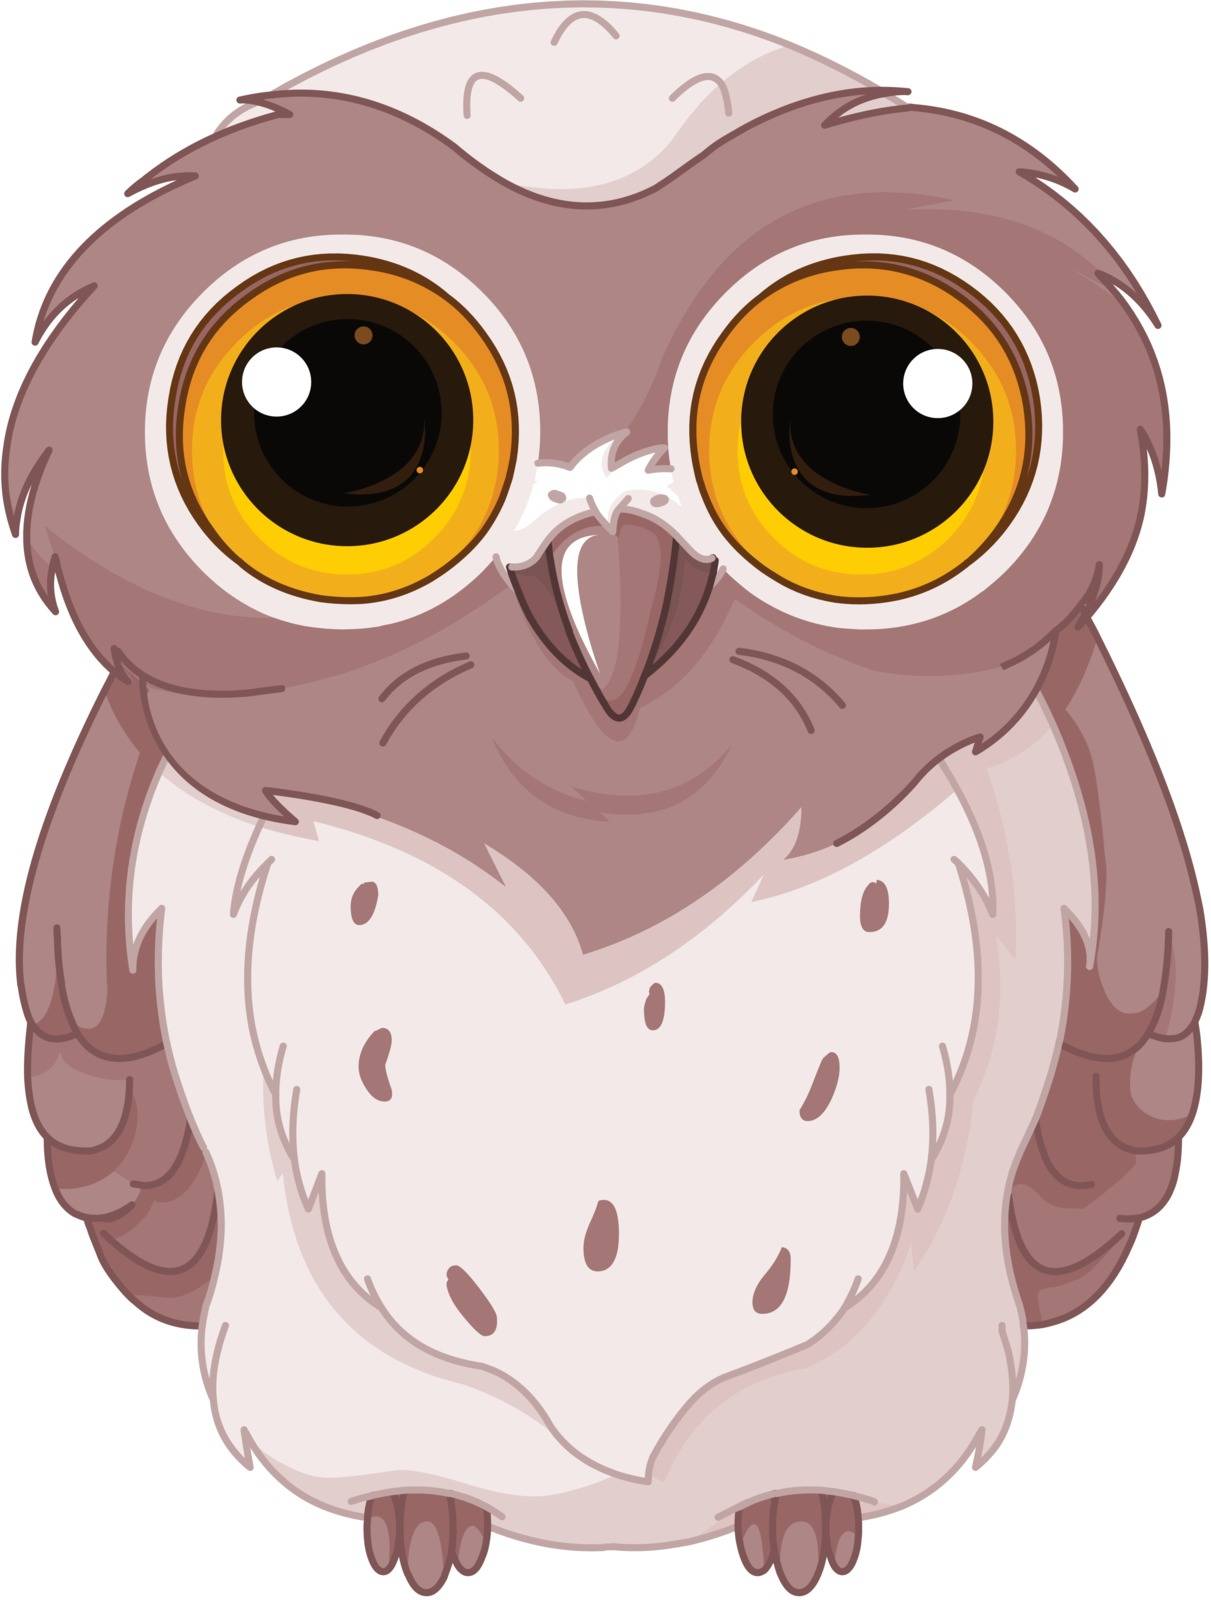 Illustration of owlet stares wide-eyed